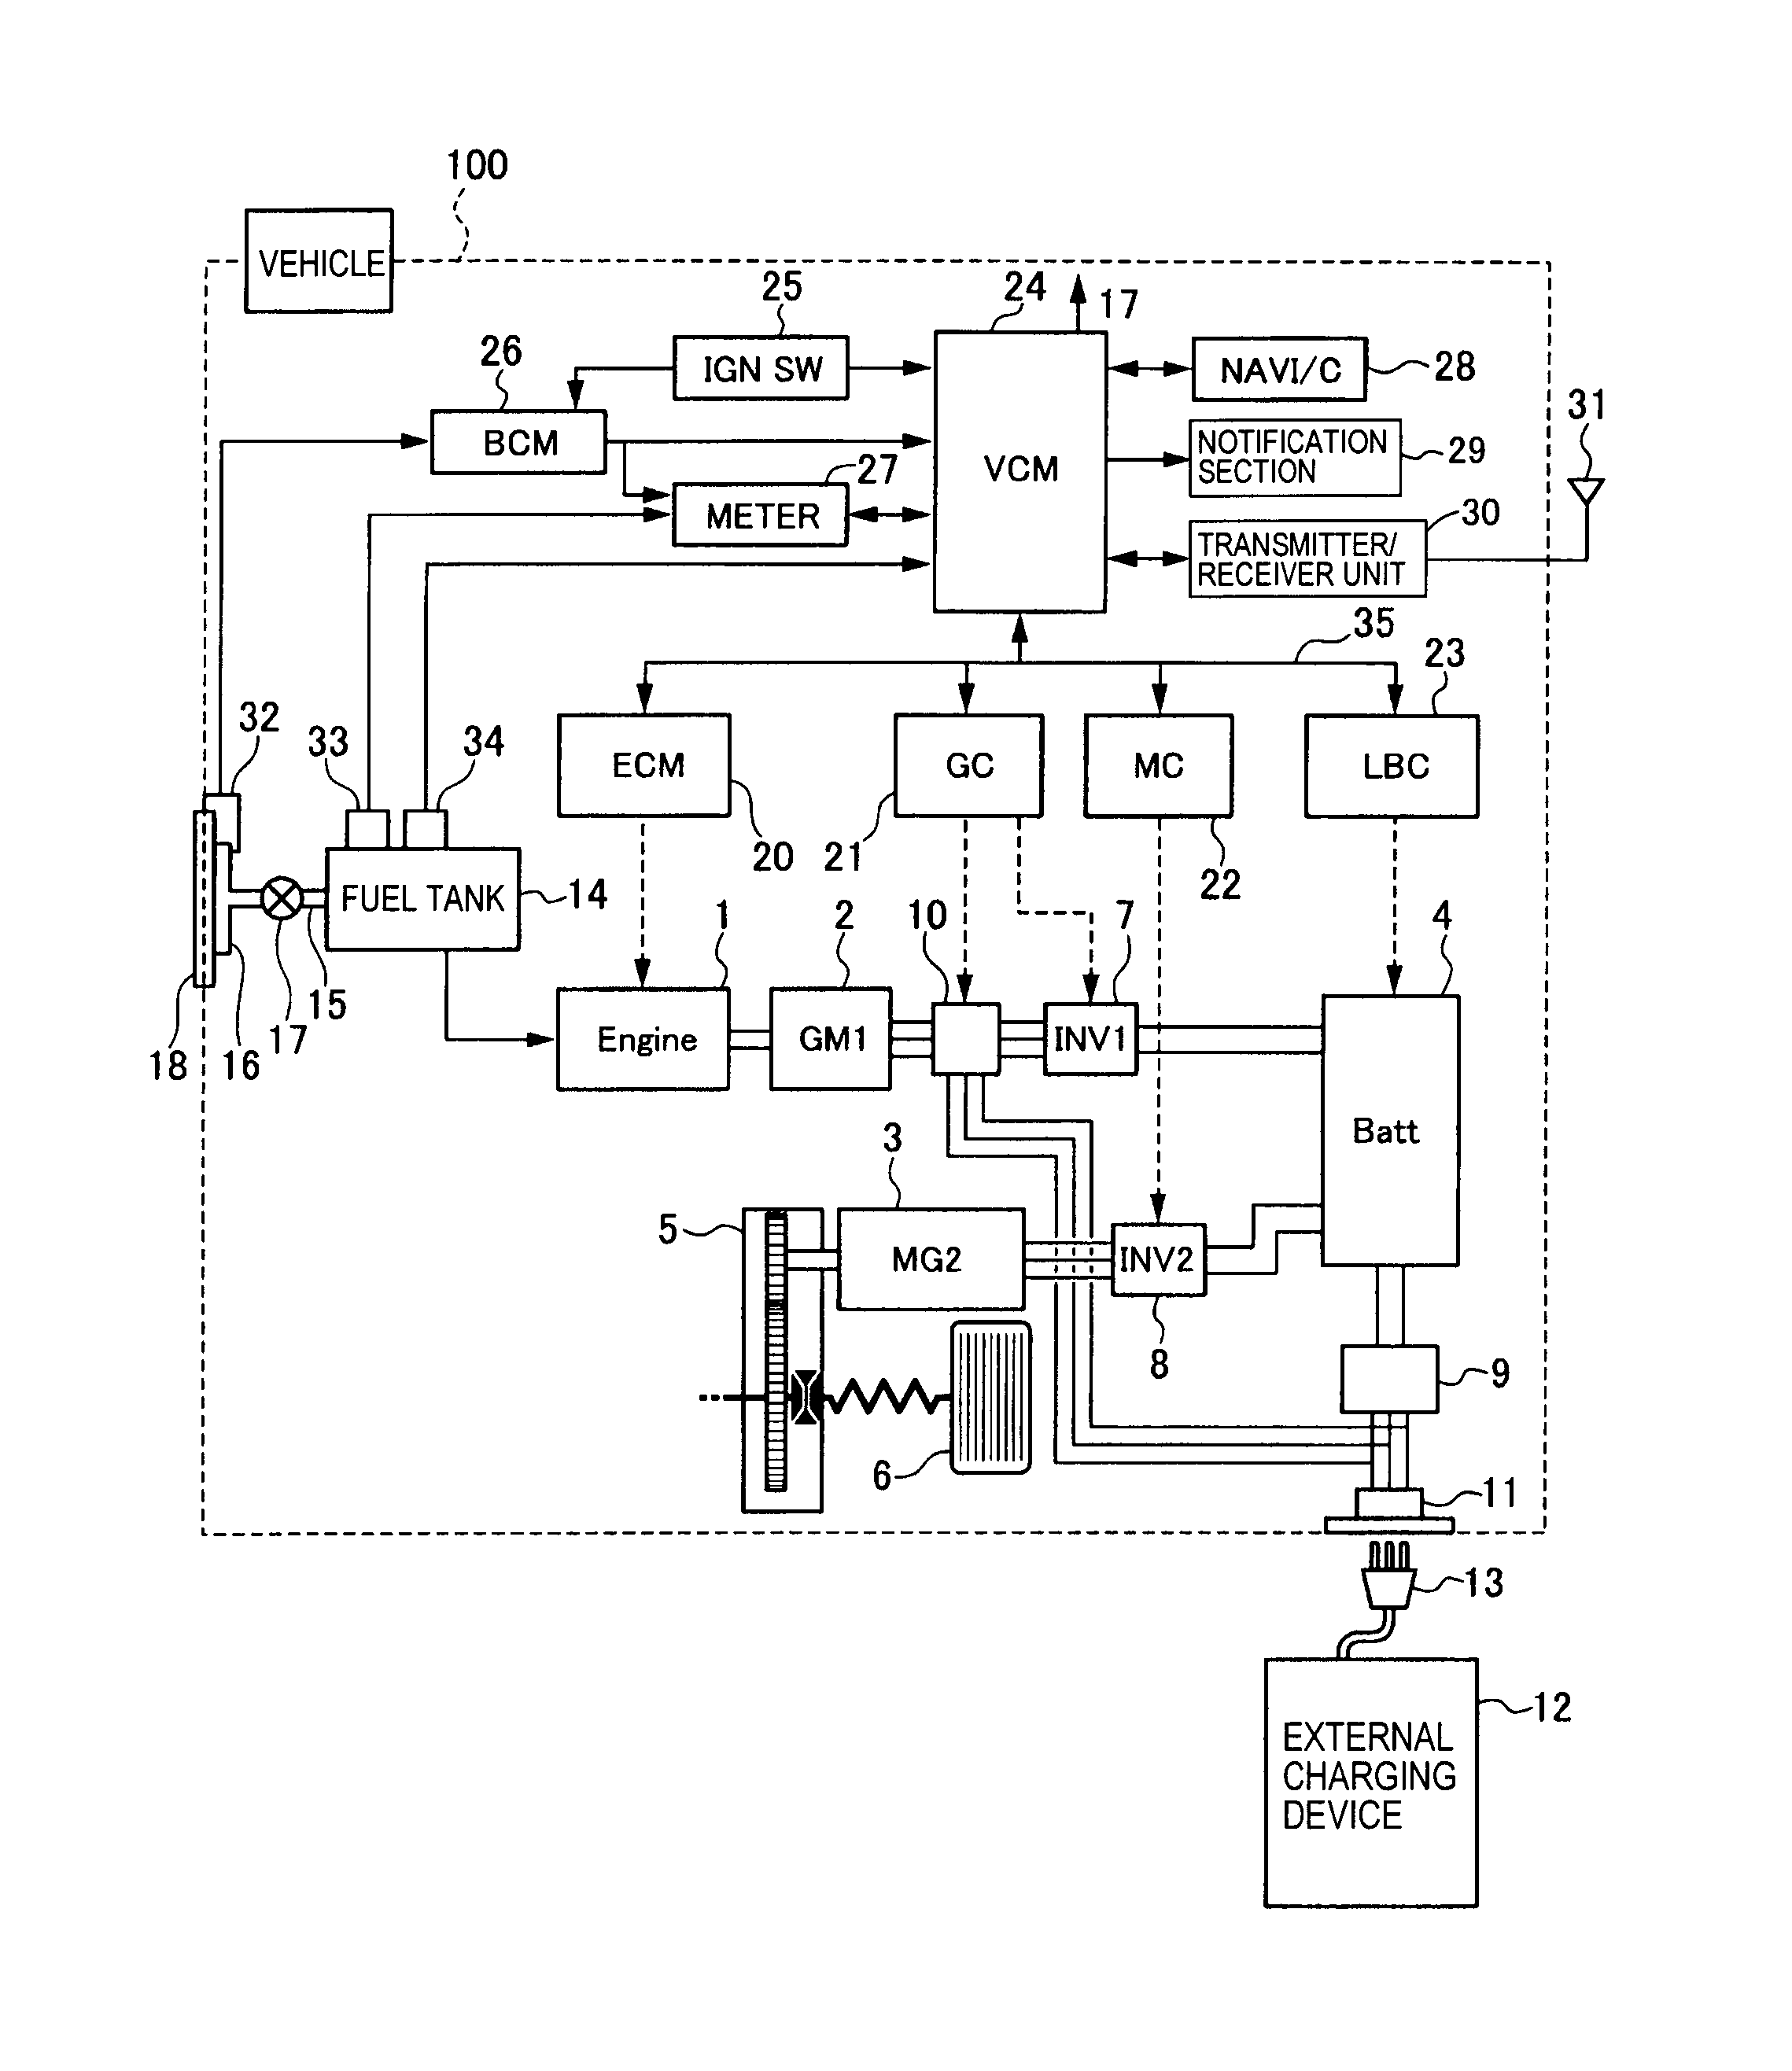 hoover windtunnel mach 6.1 wiring diagram